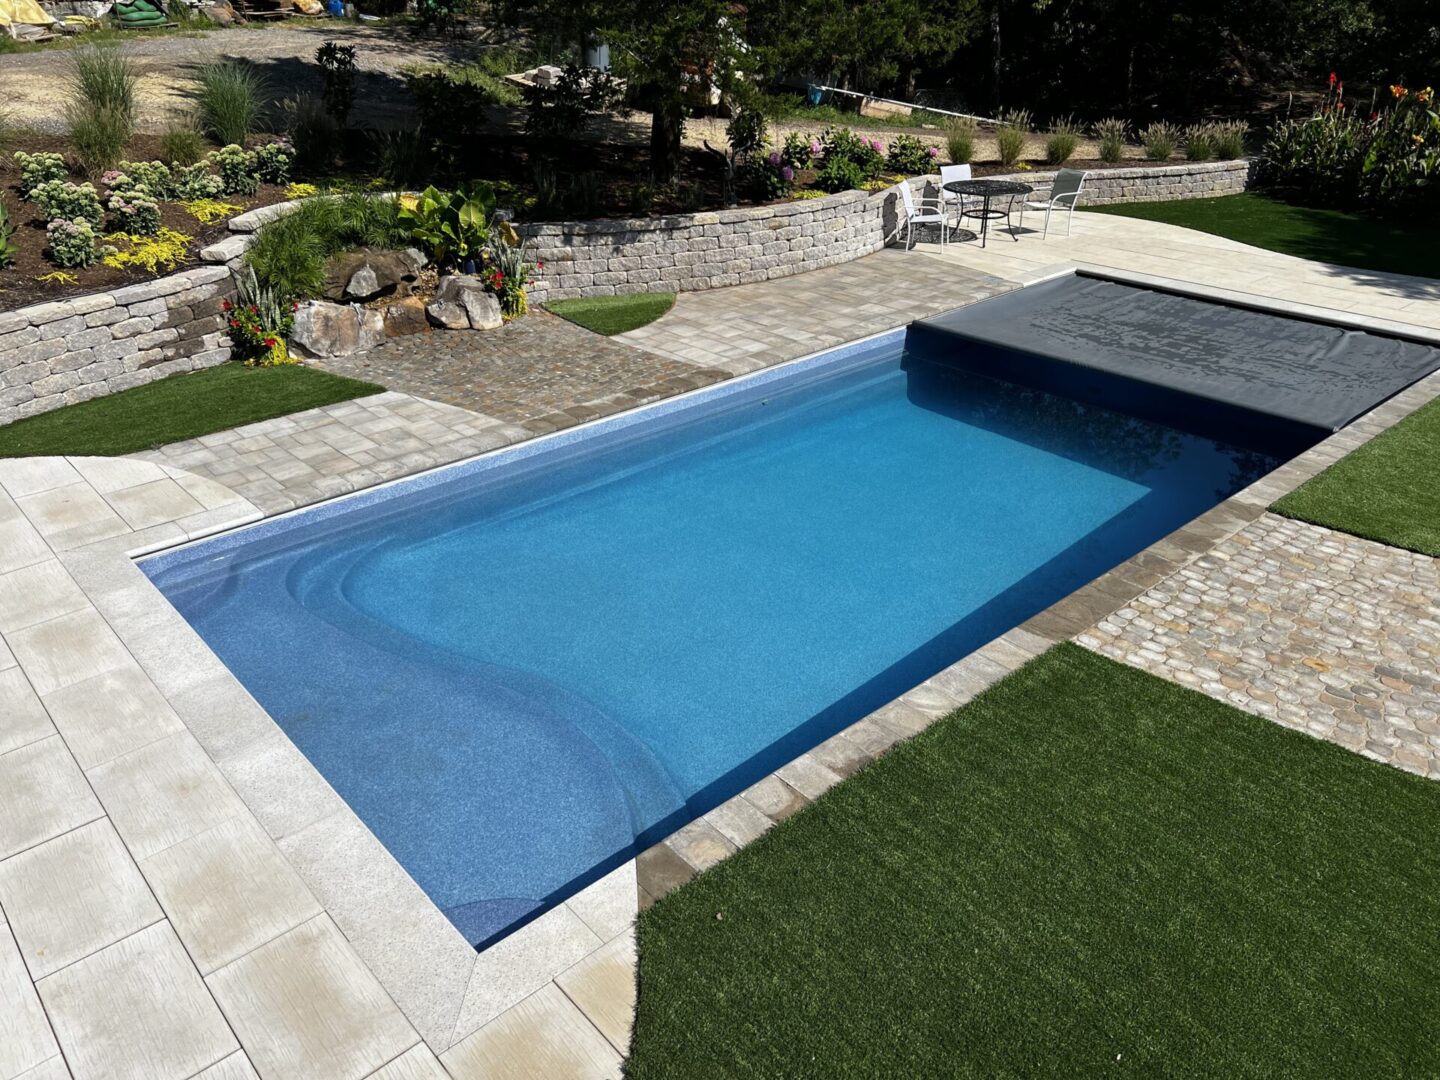 A Rectangular Shaped Pool With a Retractable Cover